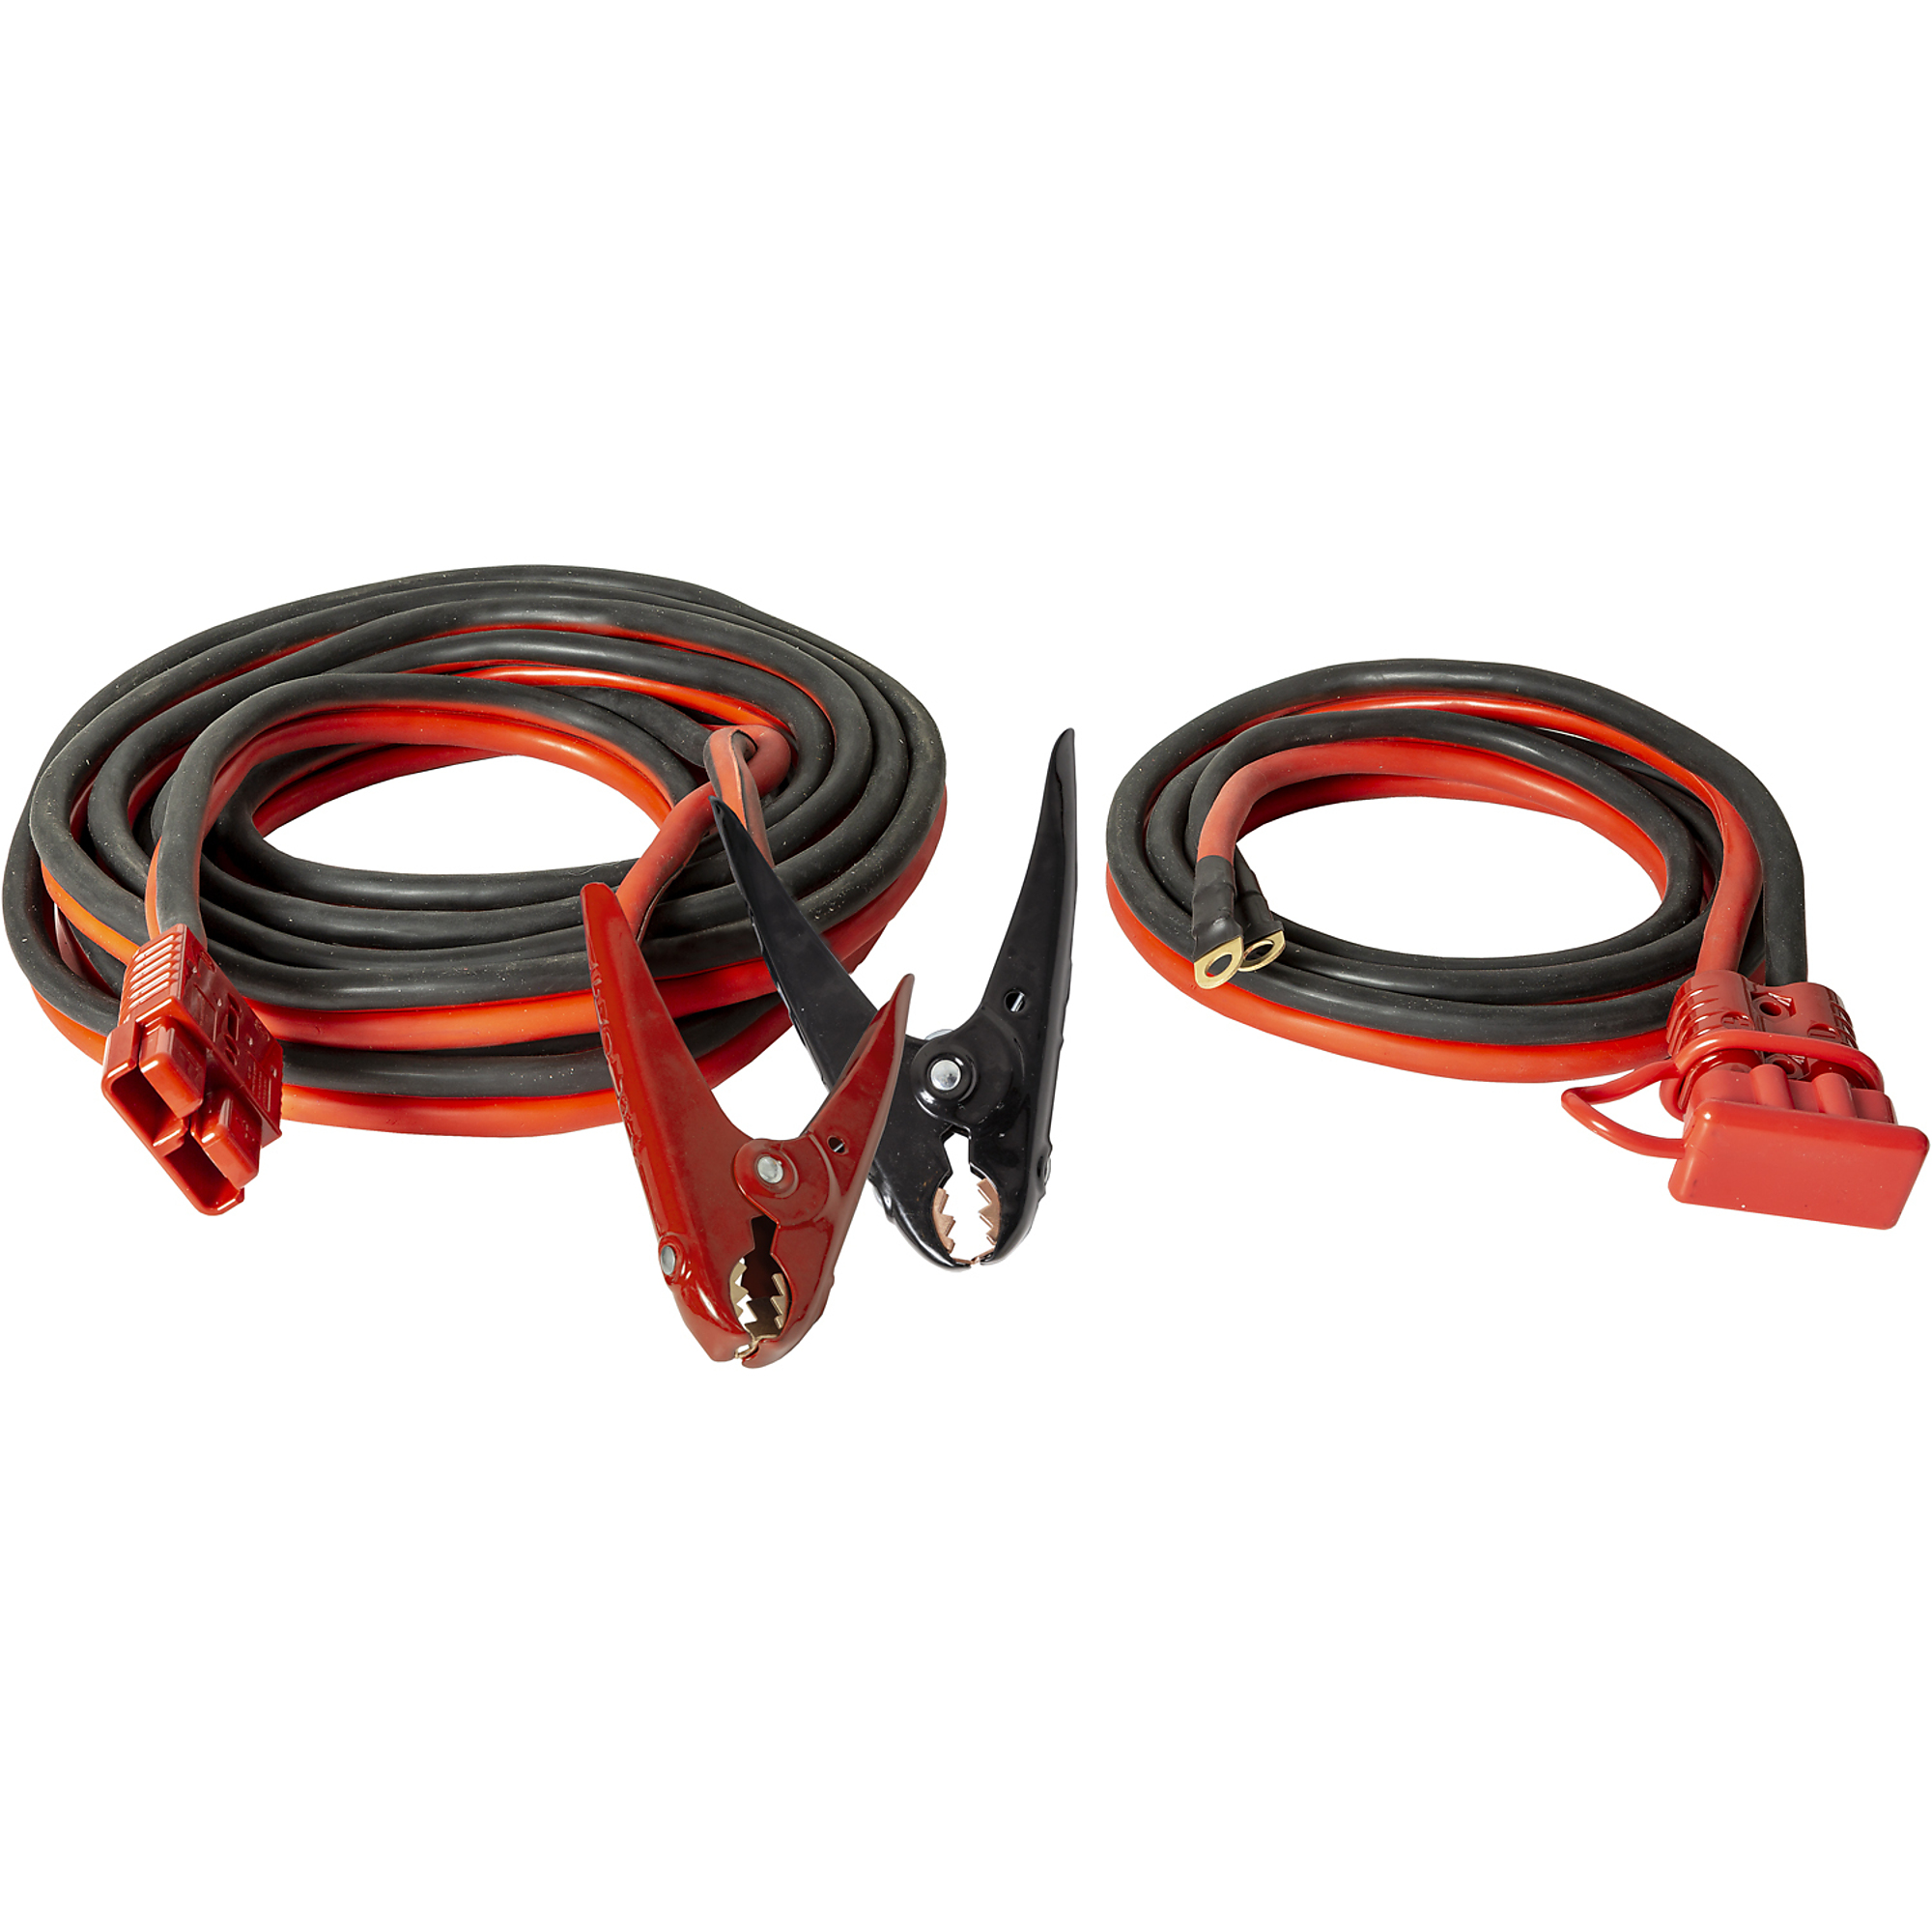 Buyers Products, 32.5ft. Long Booster Cables - 800 Amp, Cable Gauge 2 Length 32.5 ft, Amps 800 Model 5601032